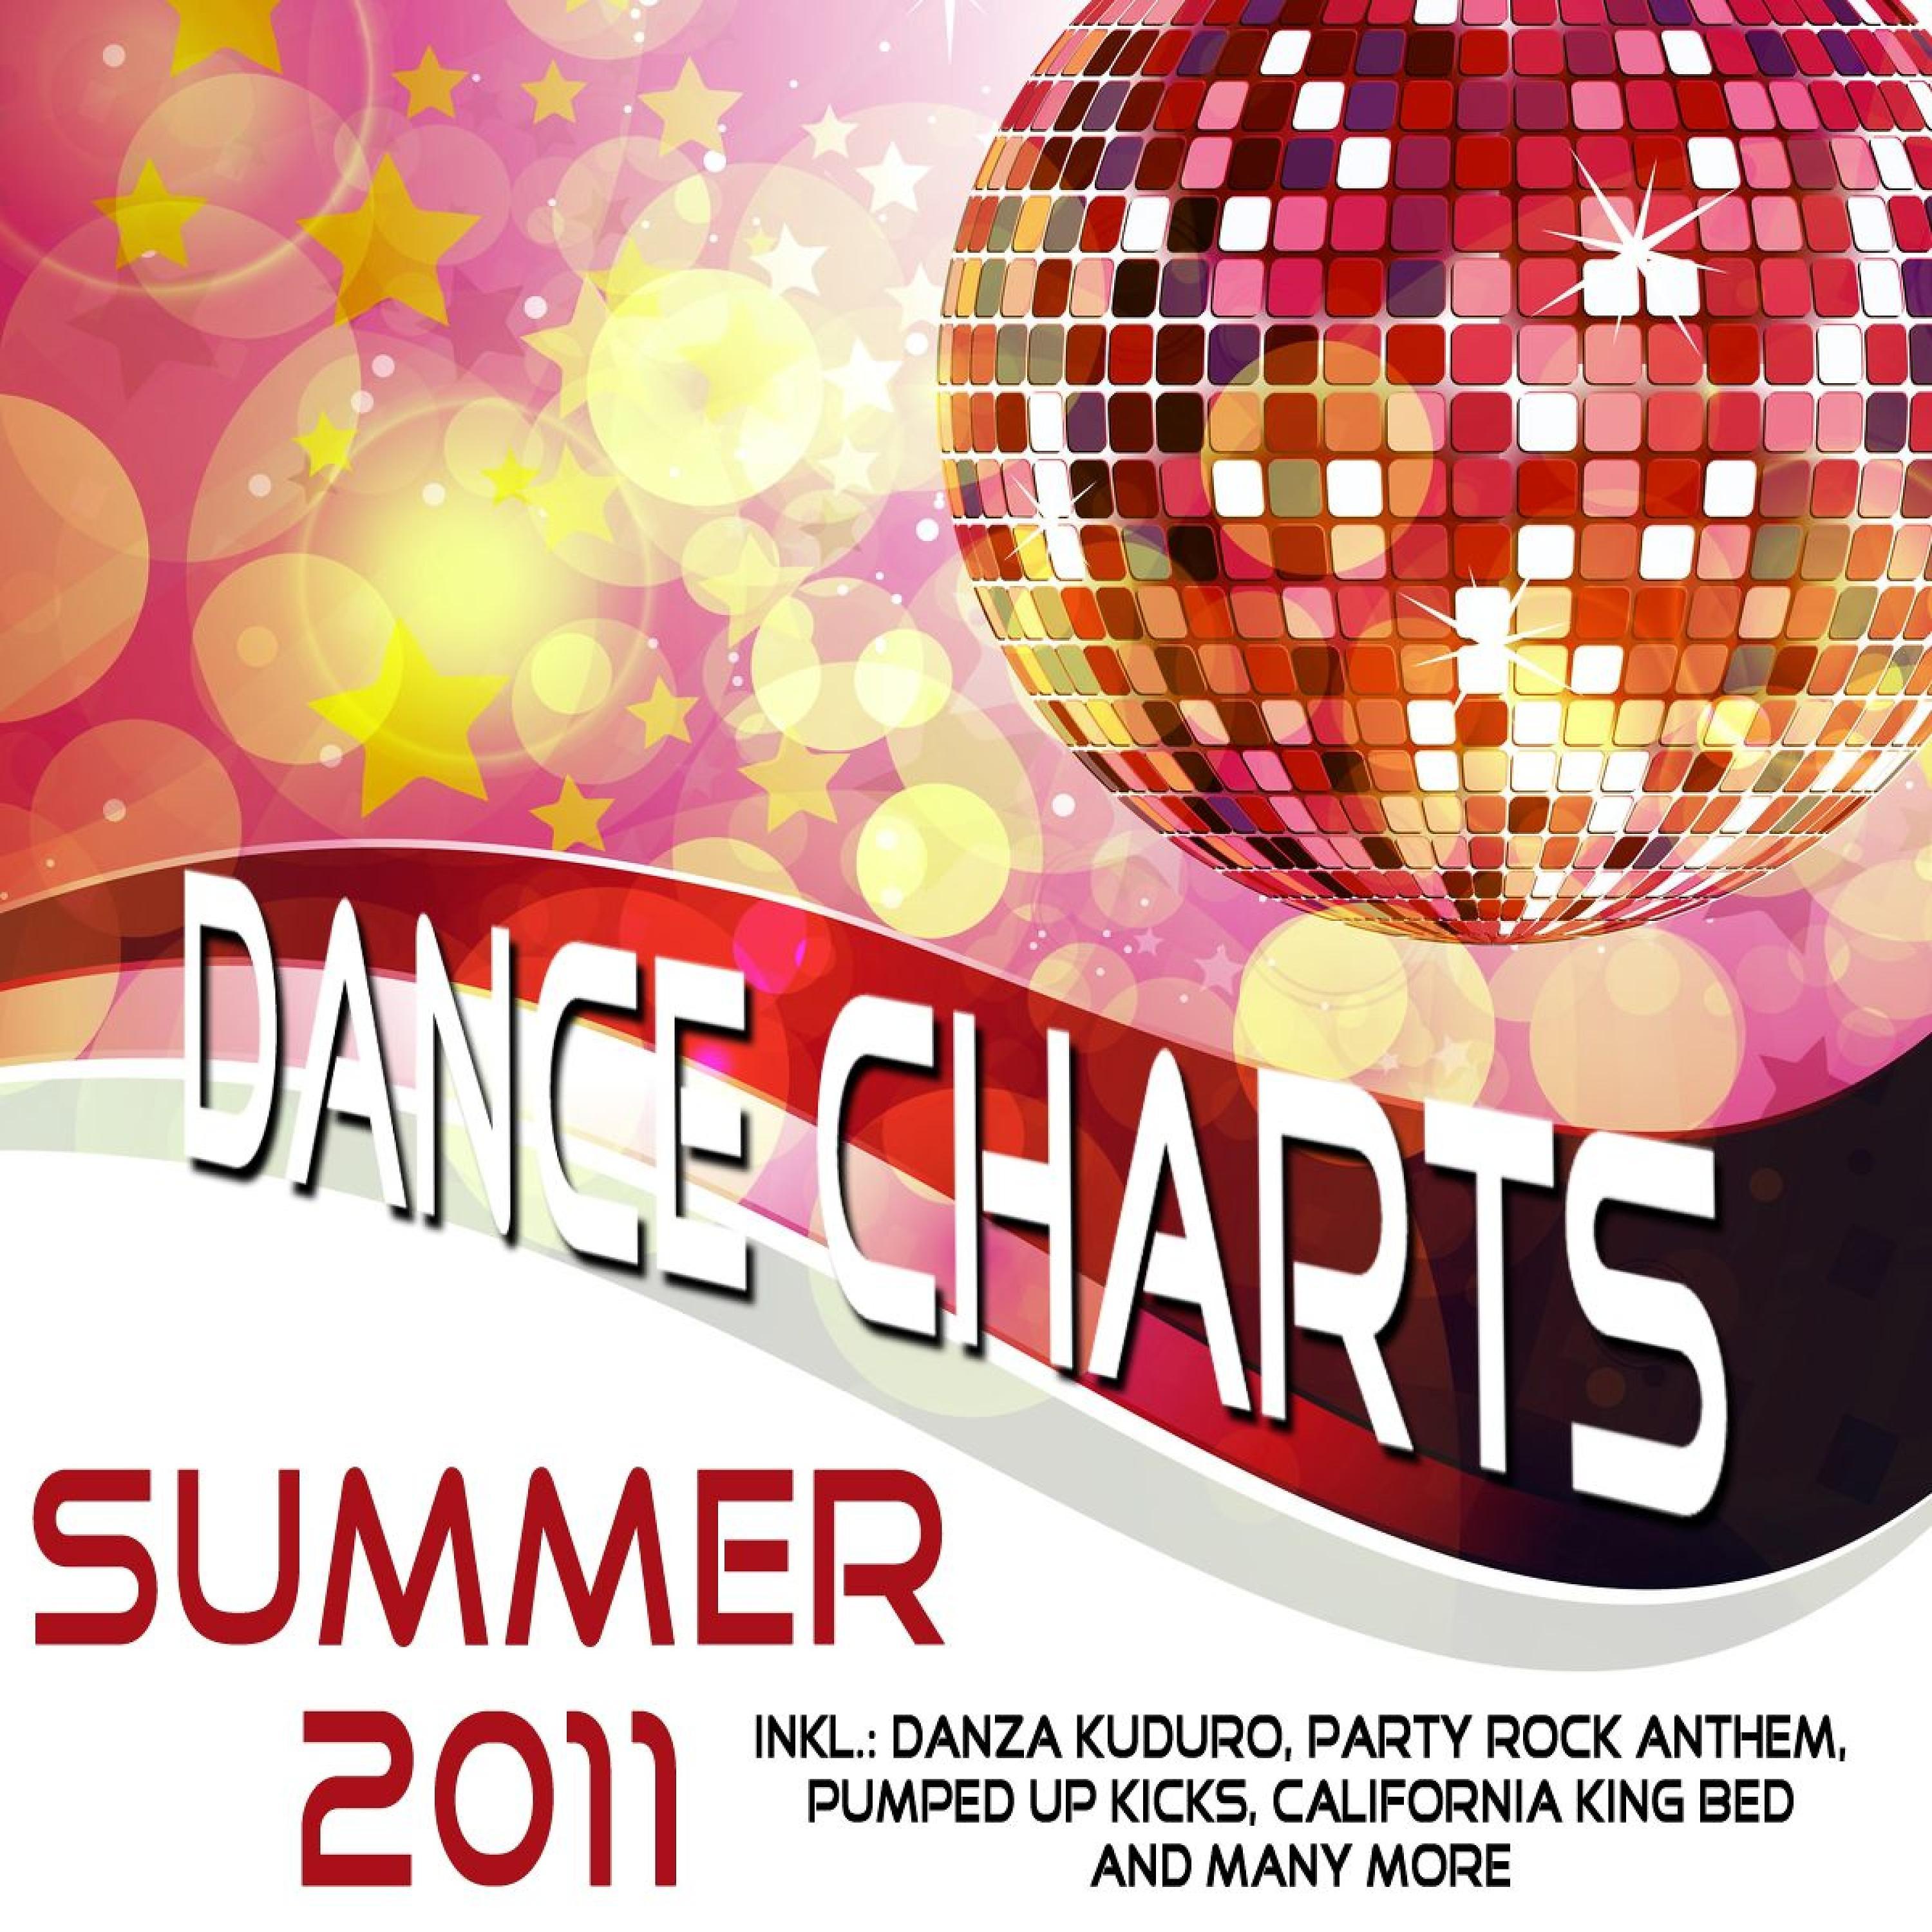 Постер альбома Dance Charts Summer 2011 – Incl. Danza Kuduro Party Rock Anthem California King Bed on the Floor and Many More